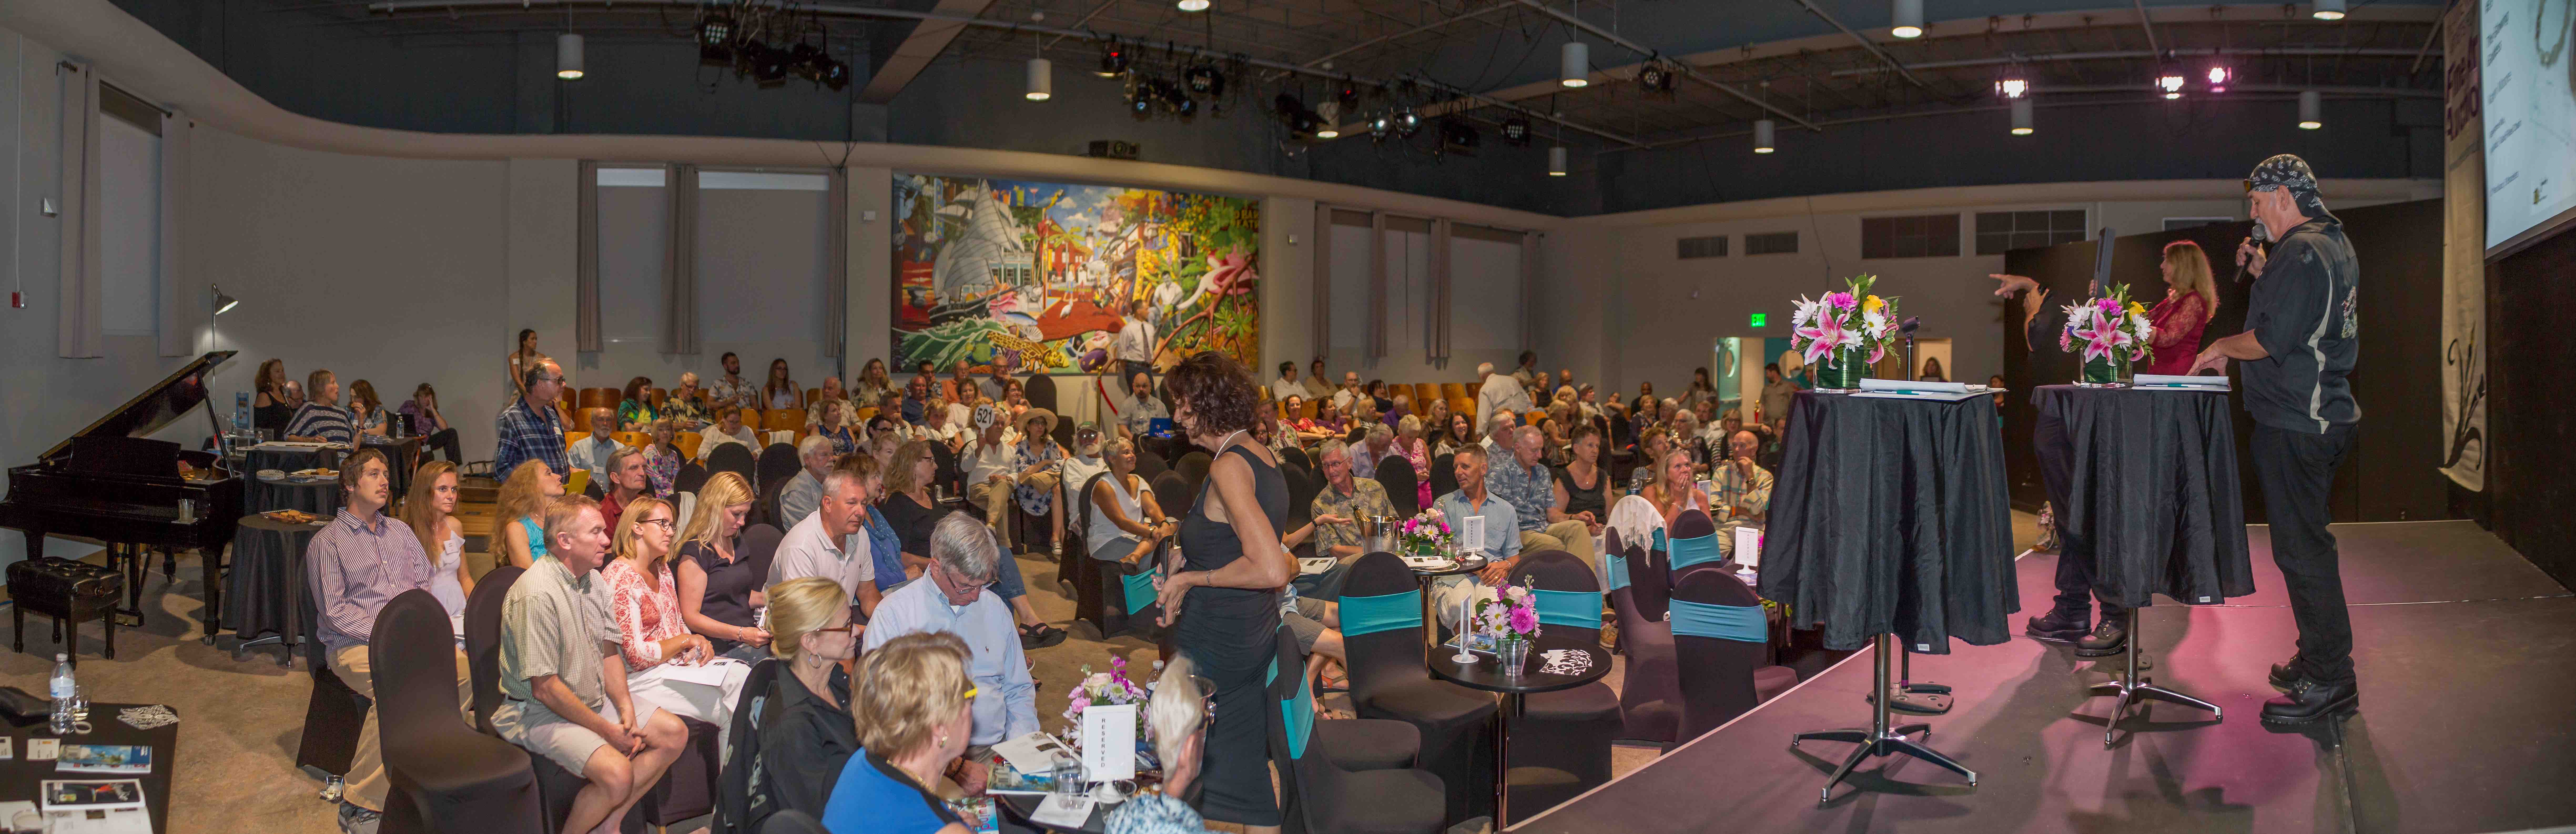 With almost a quarter century of “artists helping artists” behind them, The Studios is proud to host the annual Anne McKee auction, where aficionados gather for one of the most popular art parties of the year. Proceeds help fund the vital grant program for Keys artists.